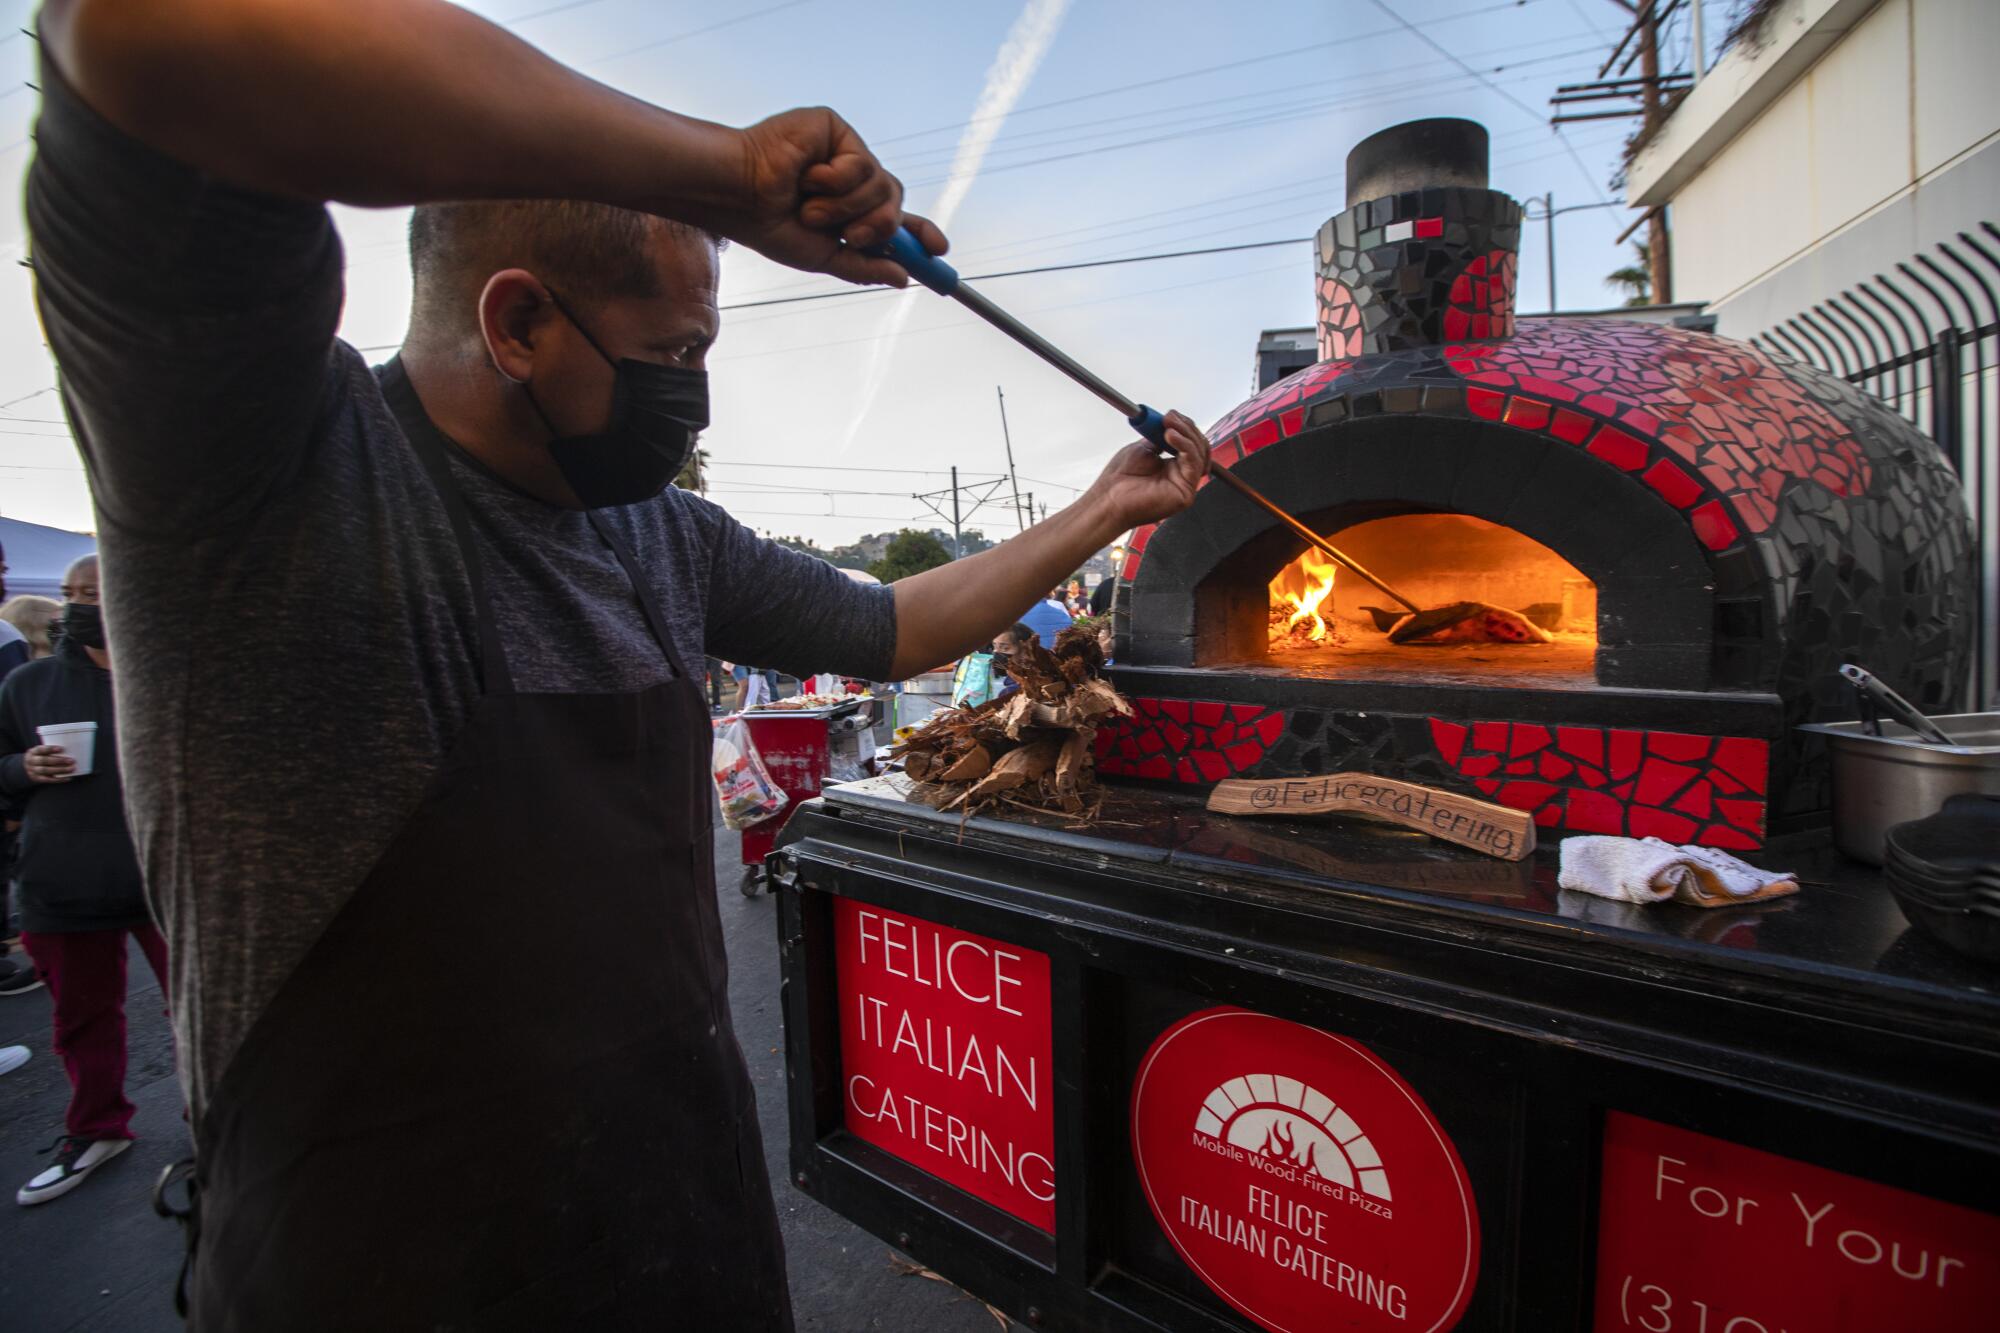 A man checks on a pizza in a wood-fired oven.